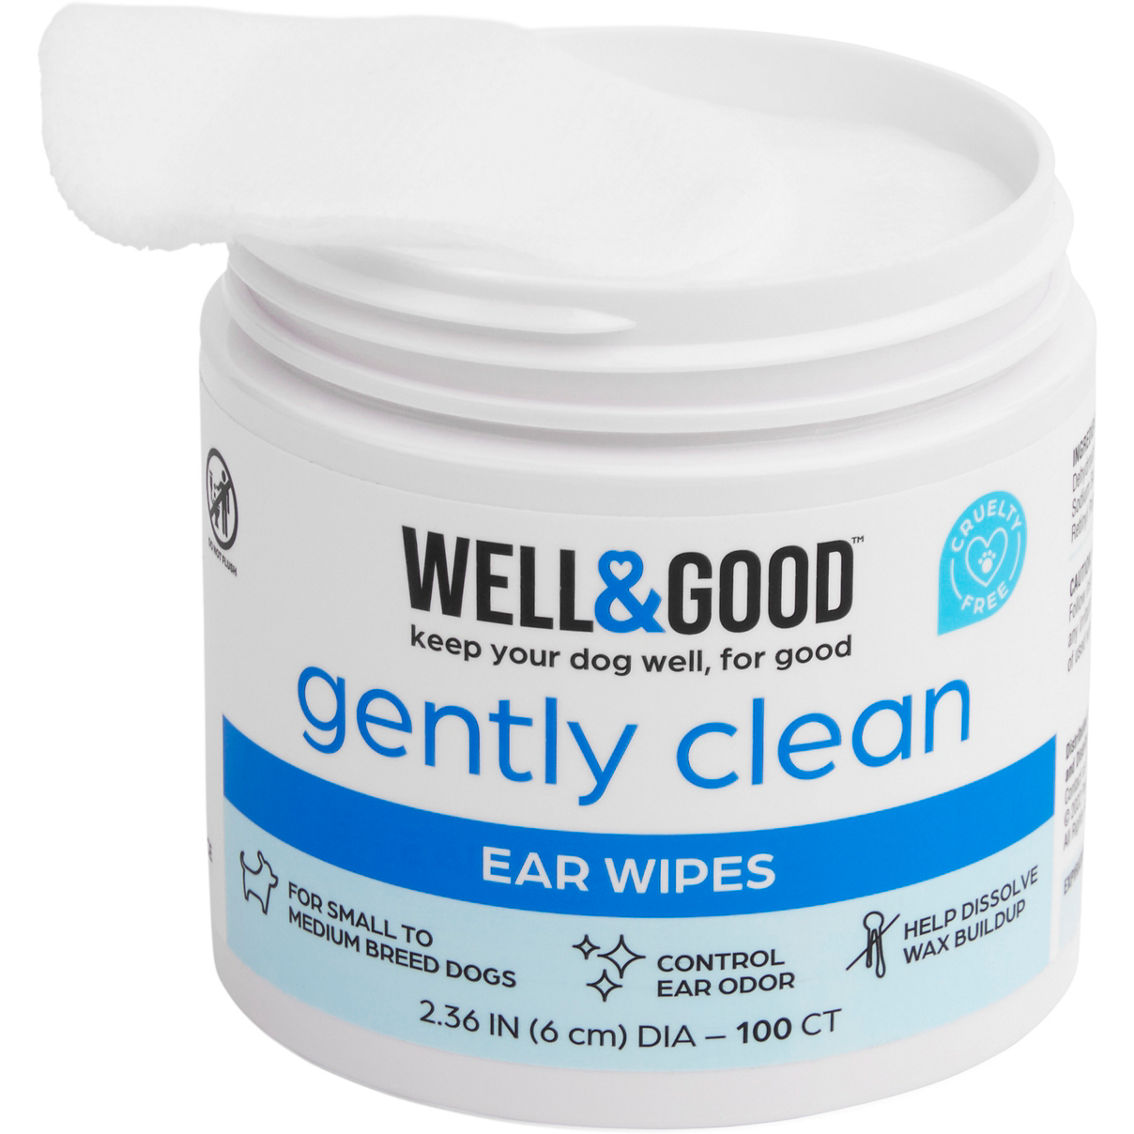 Well & Good Small Dog Ear Wipes 100 pk. - Image 4 of 4